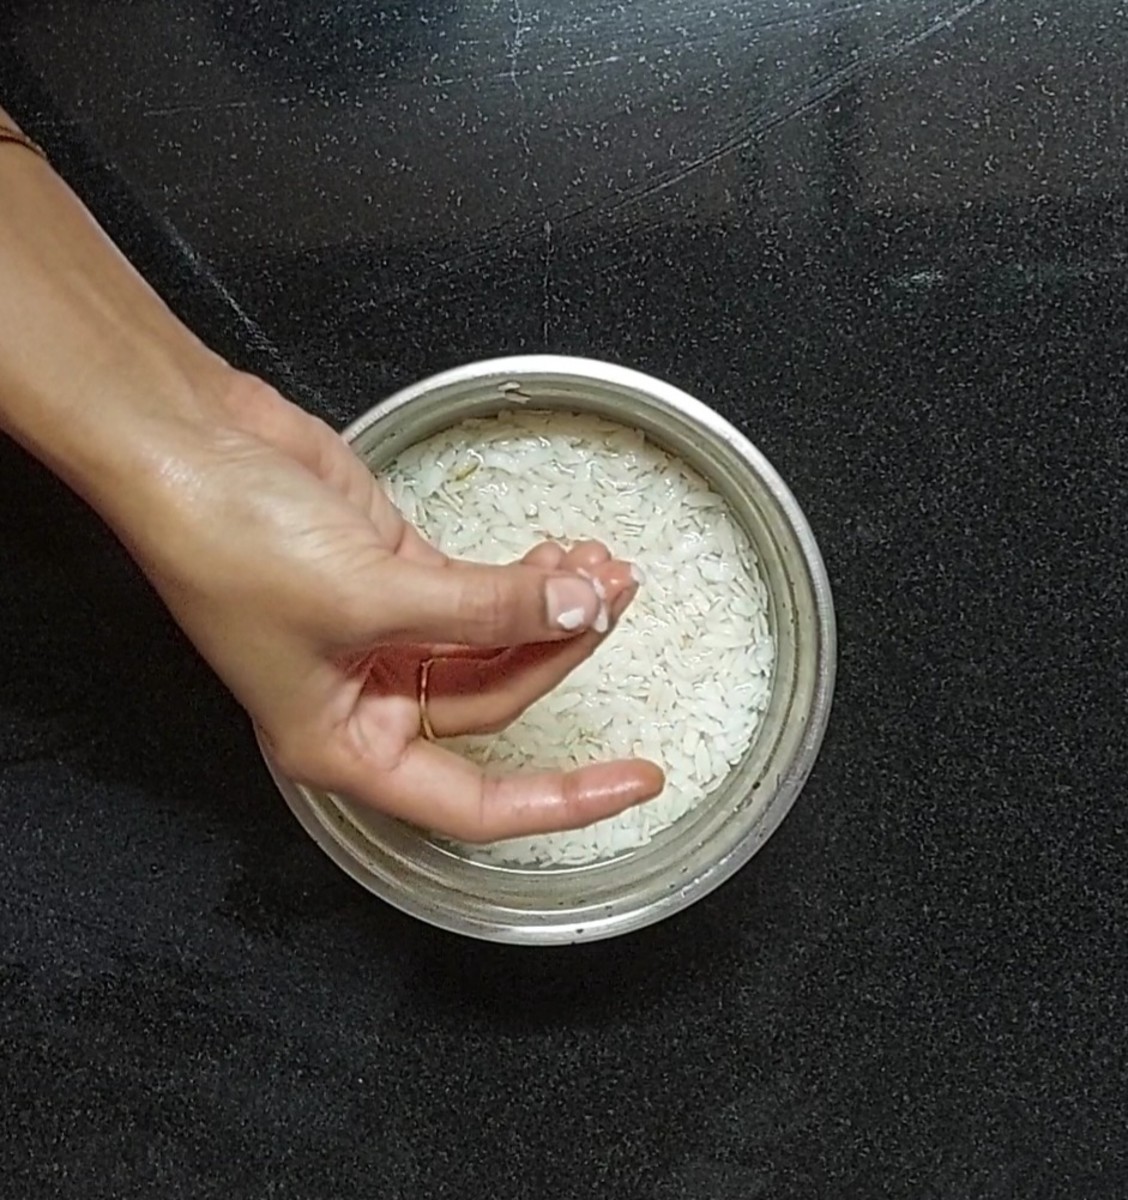 After 5 minutes, check the softness by crushing poha between the fingers. If it breaks easily then it is done.